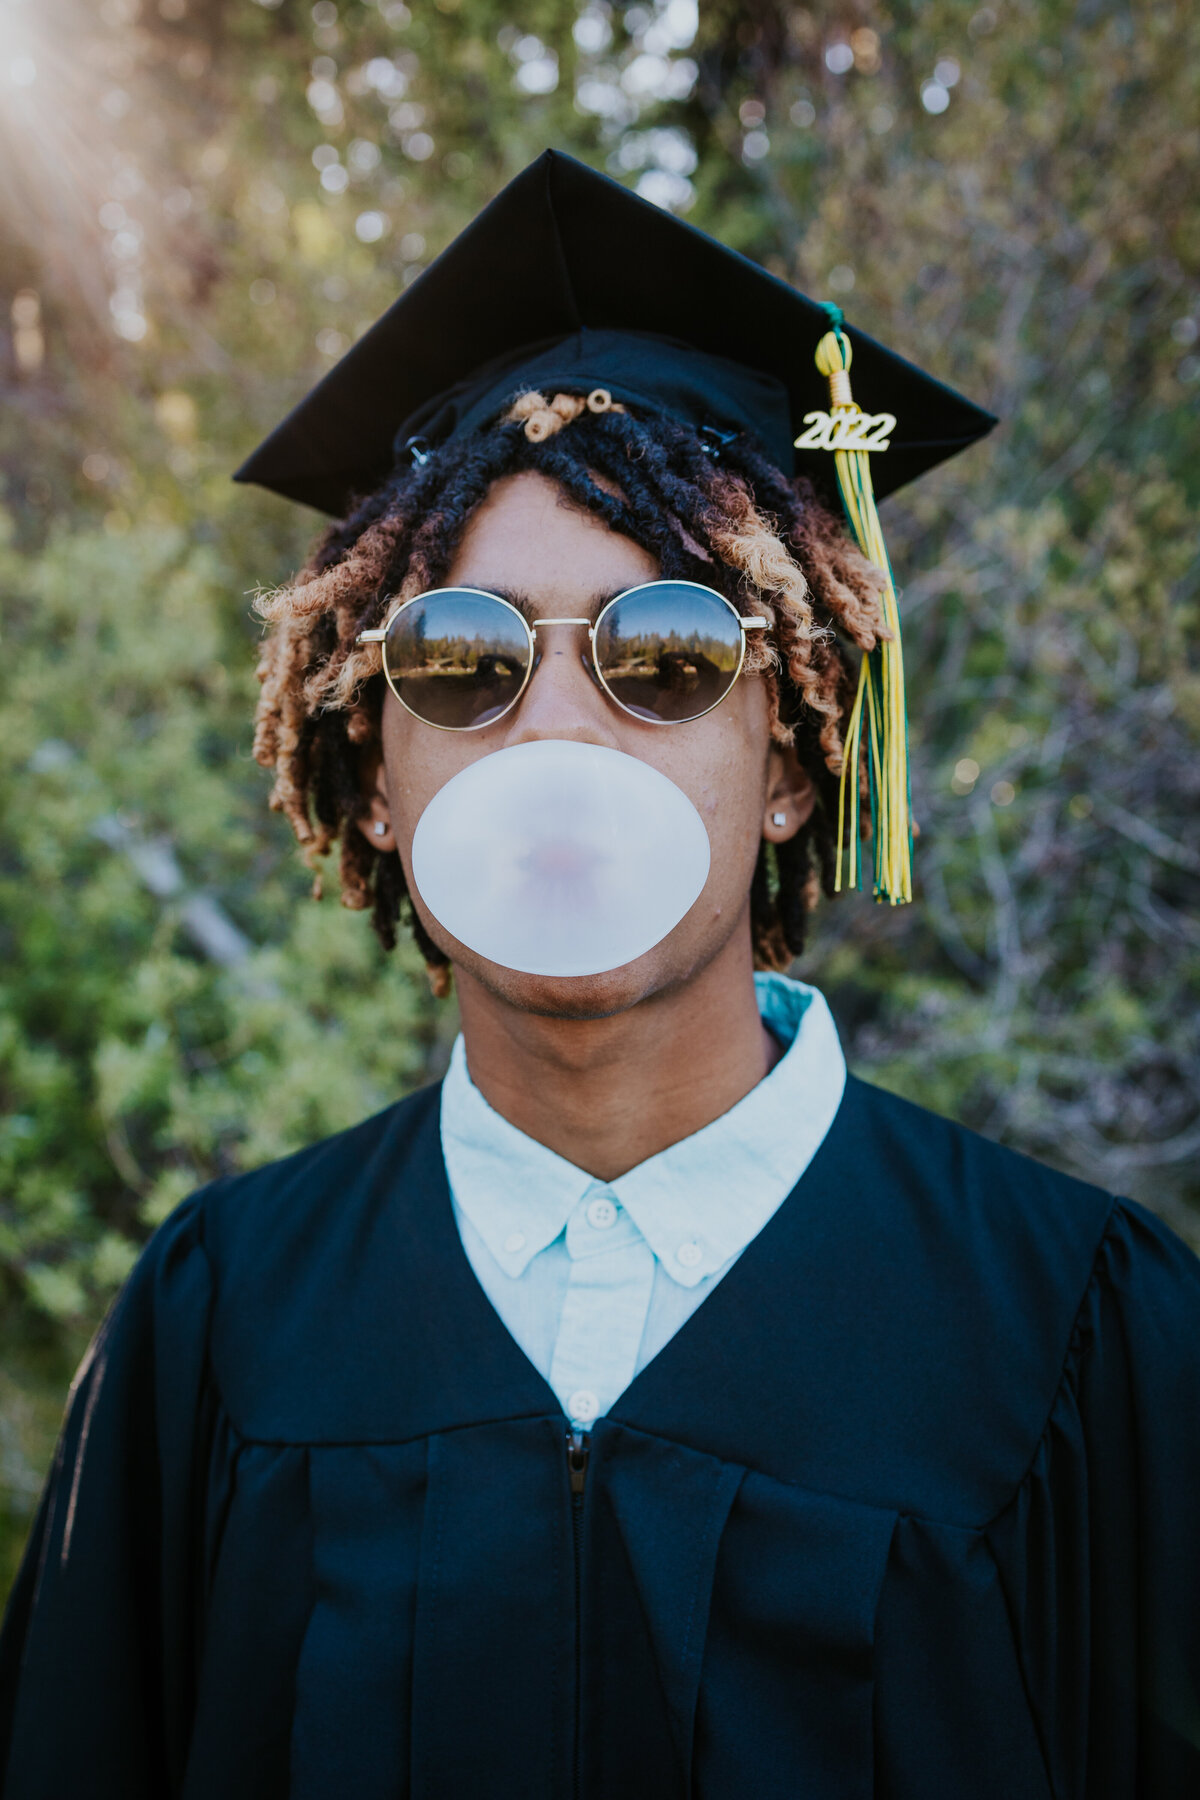 Young man wearing sunglasses and cap and gown blows giant bubble from gum.